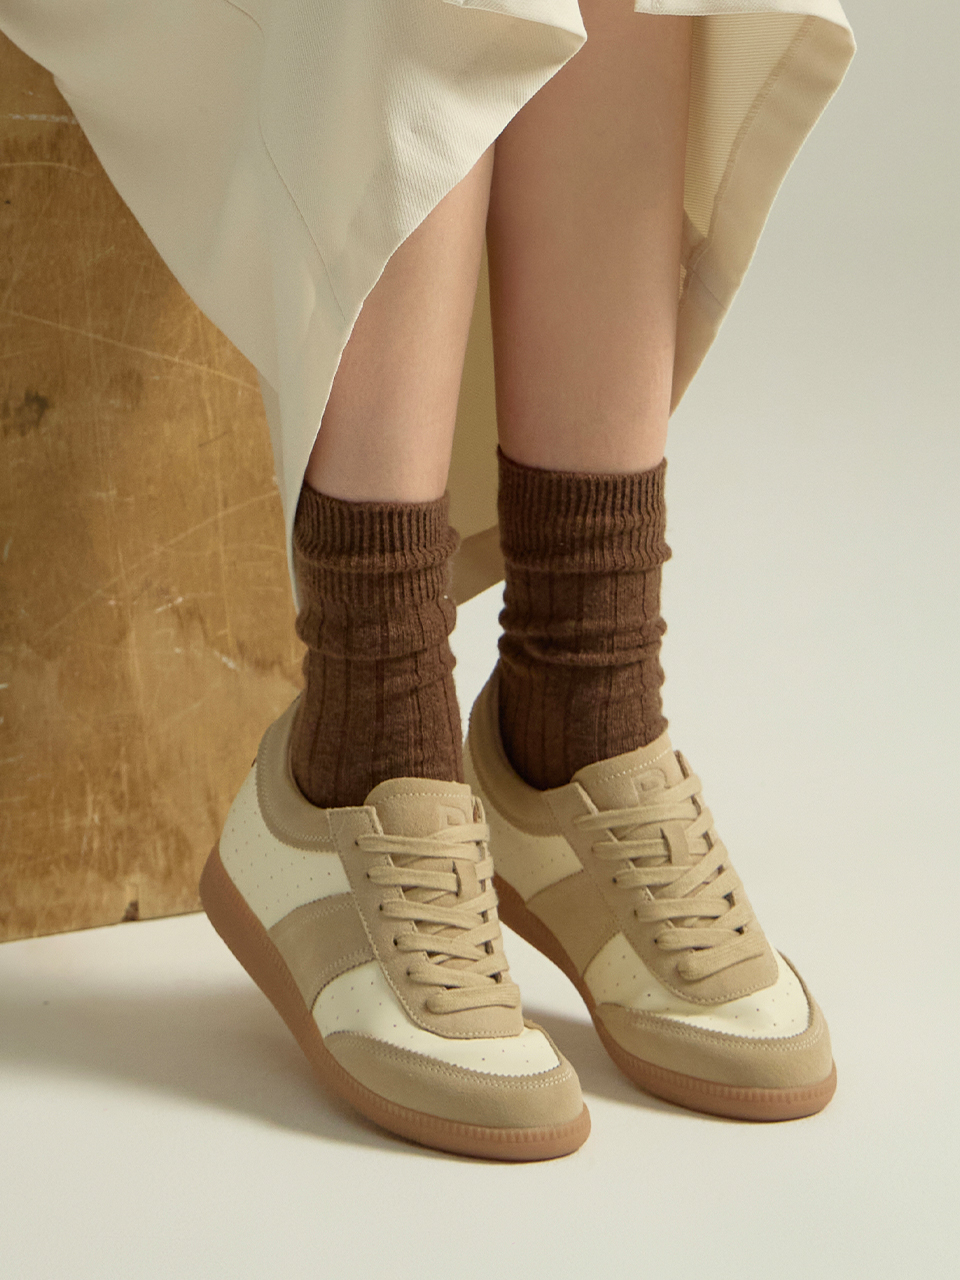 [LIMITED] HERITAGE CUIR LEATHER SHOES (FOR WOMAN) - CREAM BEIGE